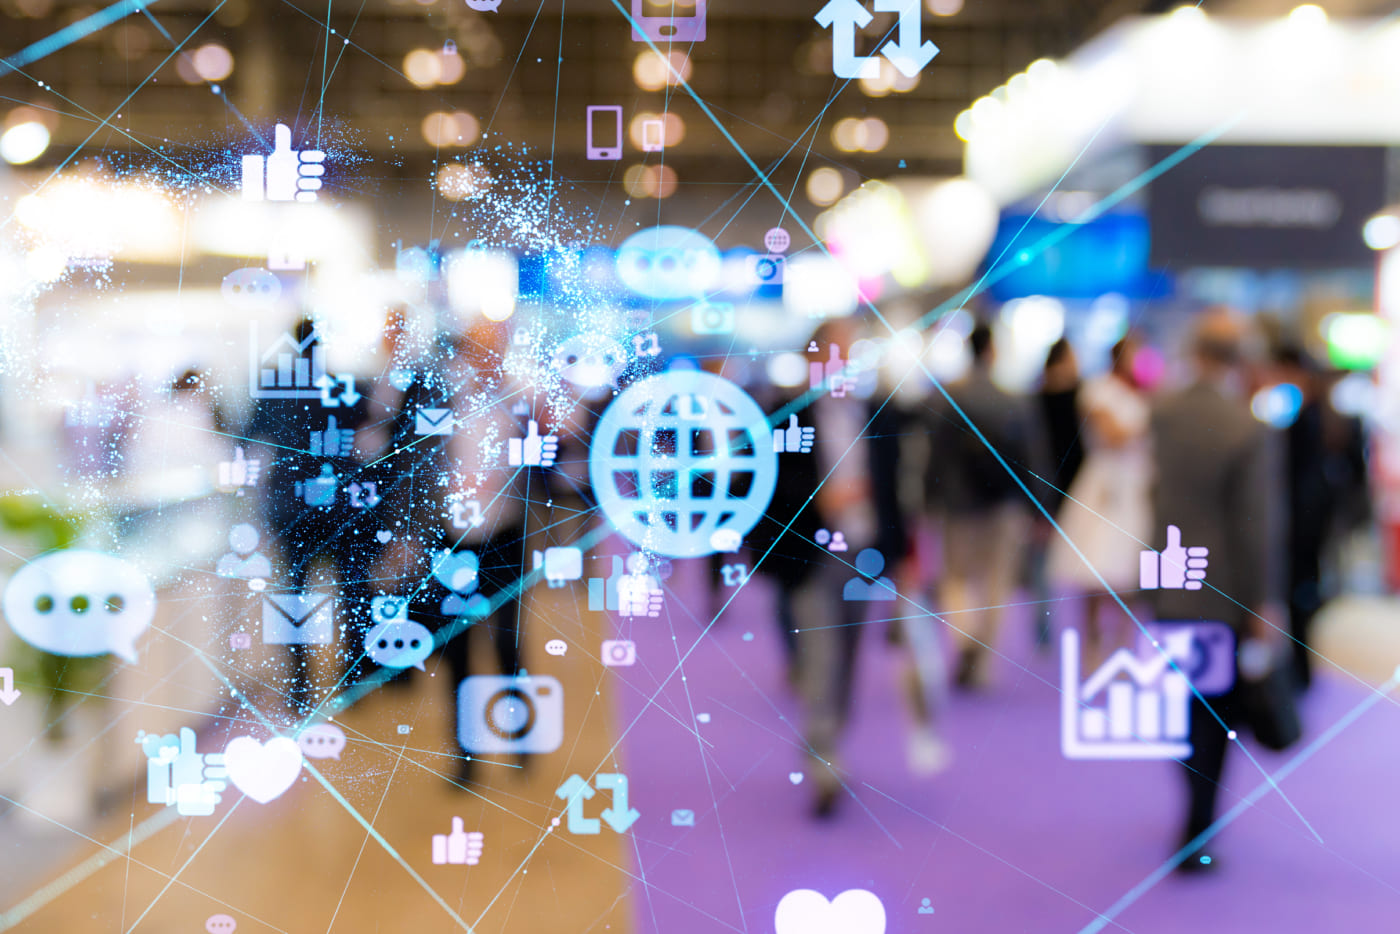 The 5 Biggest Event And Exhibition Trends In 2022 | Bernard Marr